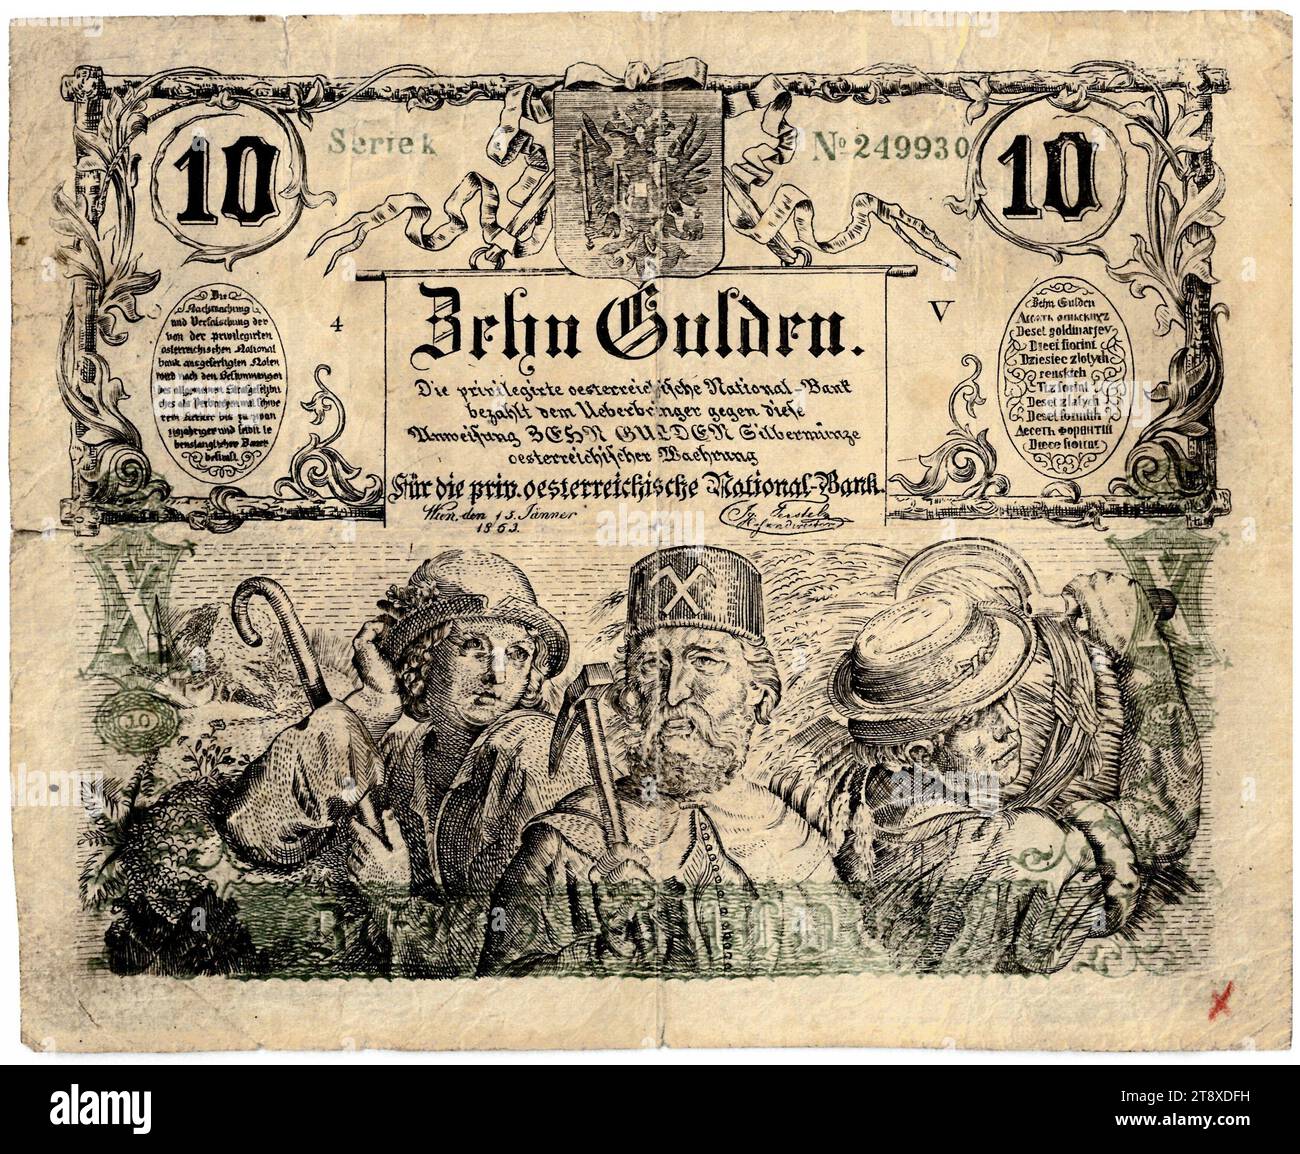 Banknote (forgery), 10 florins, Privilegierte Österreichische National-Bank, mint authority, Date after 15.01.1863, paper, printing, width 141 mm, height 115 mm, Mint, Vienna, Mint territory, Austria, Empire (1804-1867), Finance, counterfeit, forgery, farmers, working class, laborers, coat of arms (as symbol of the state, etc.), bank-note, money, The Vienna Collection Stock Photo